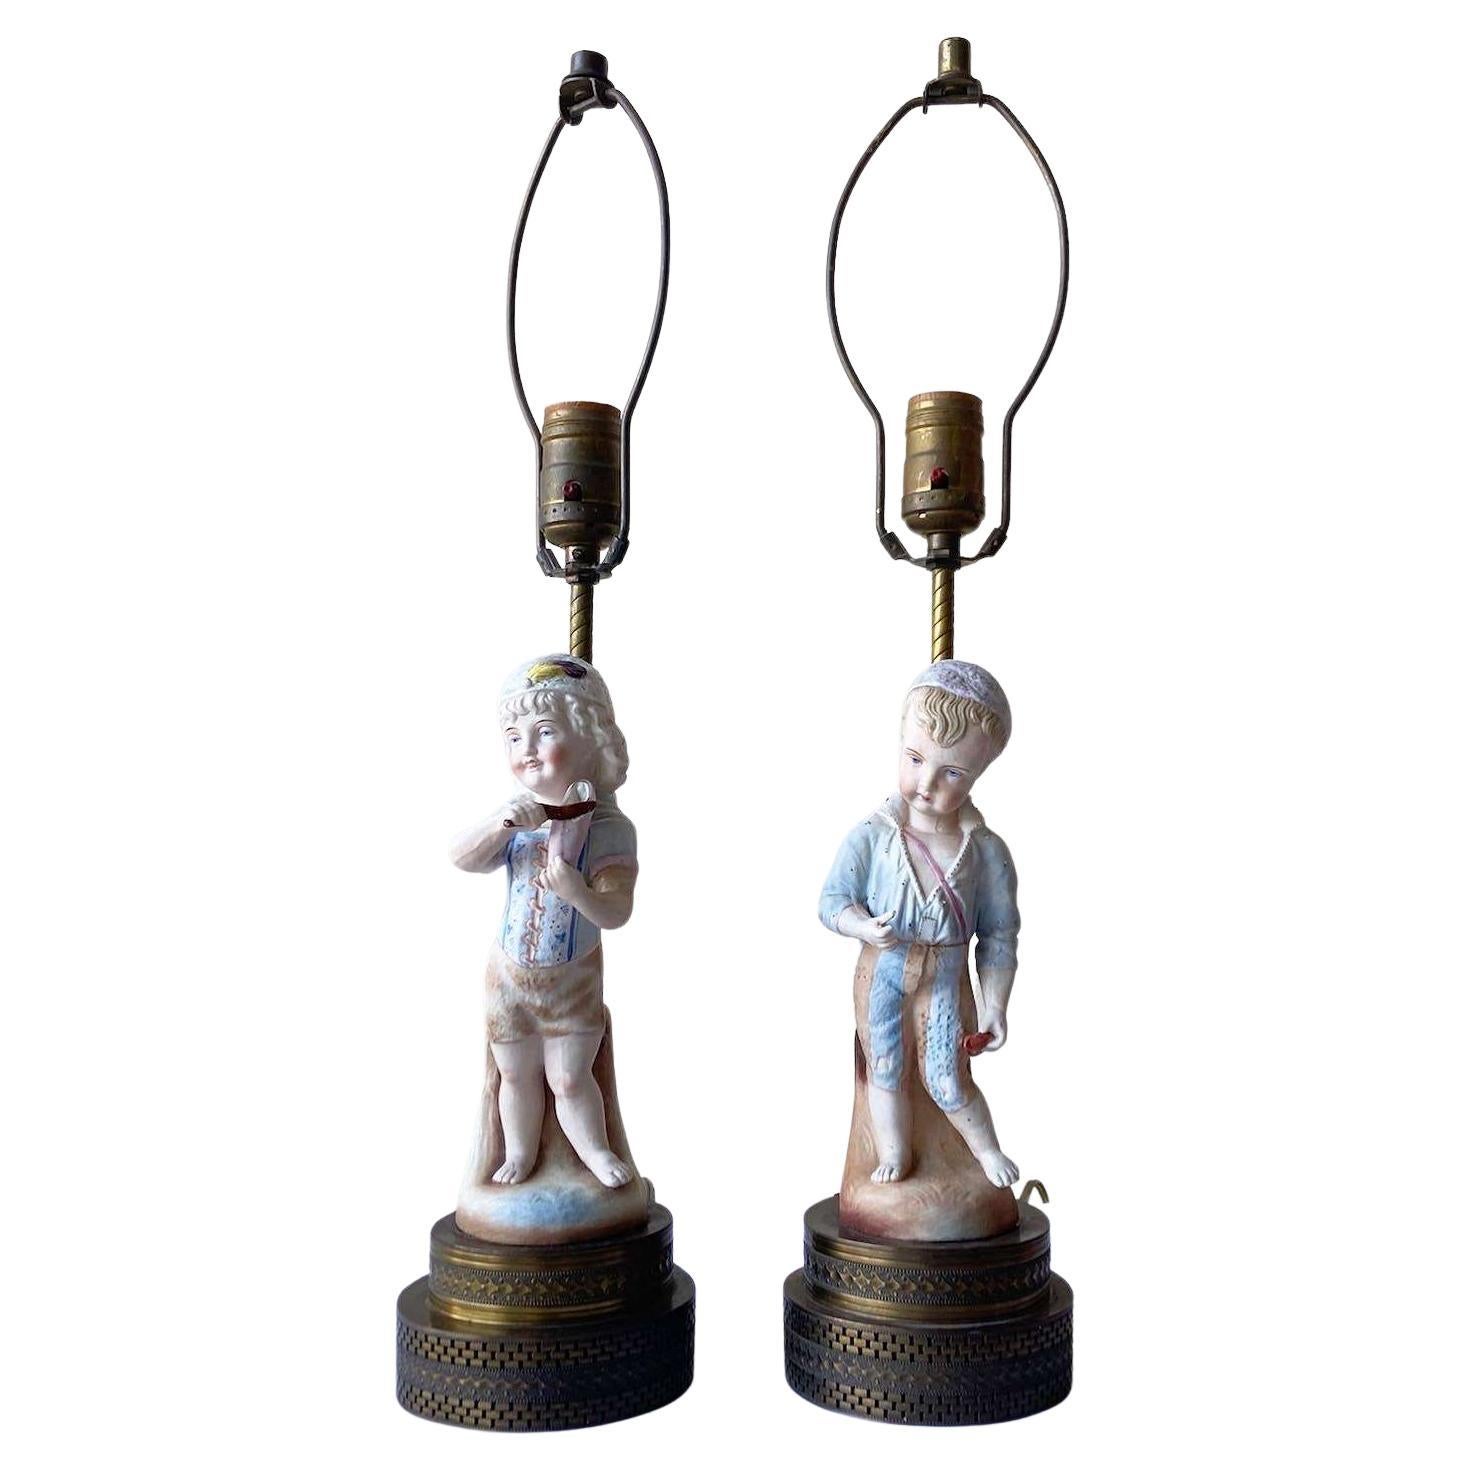 Vintage Boy and Girl Figurine Table Lamps